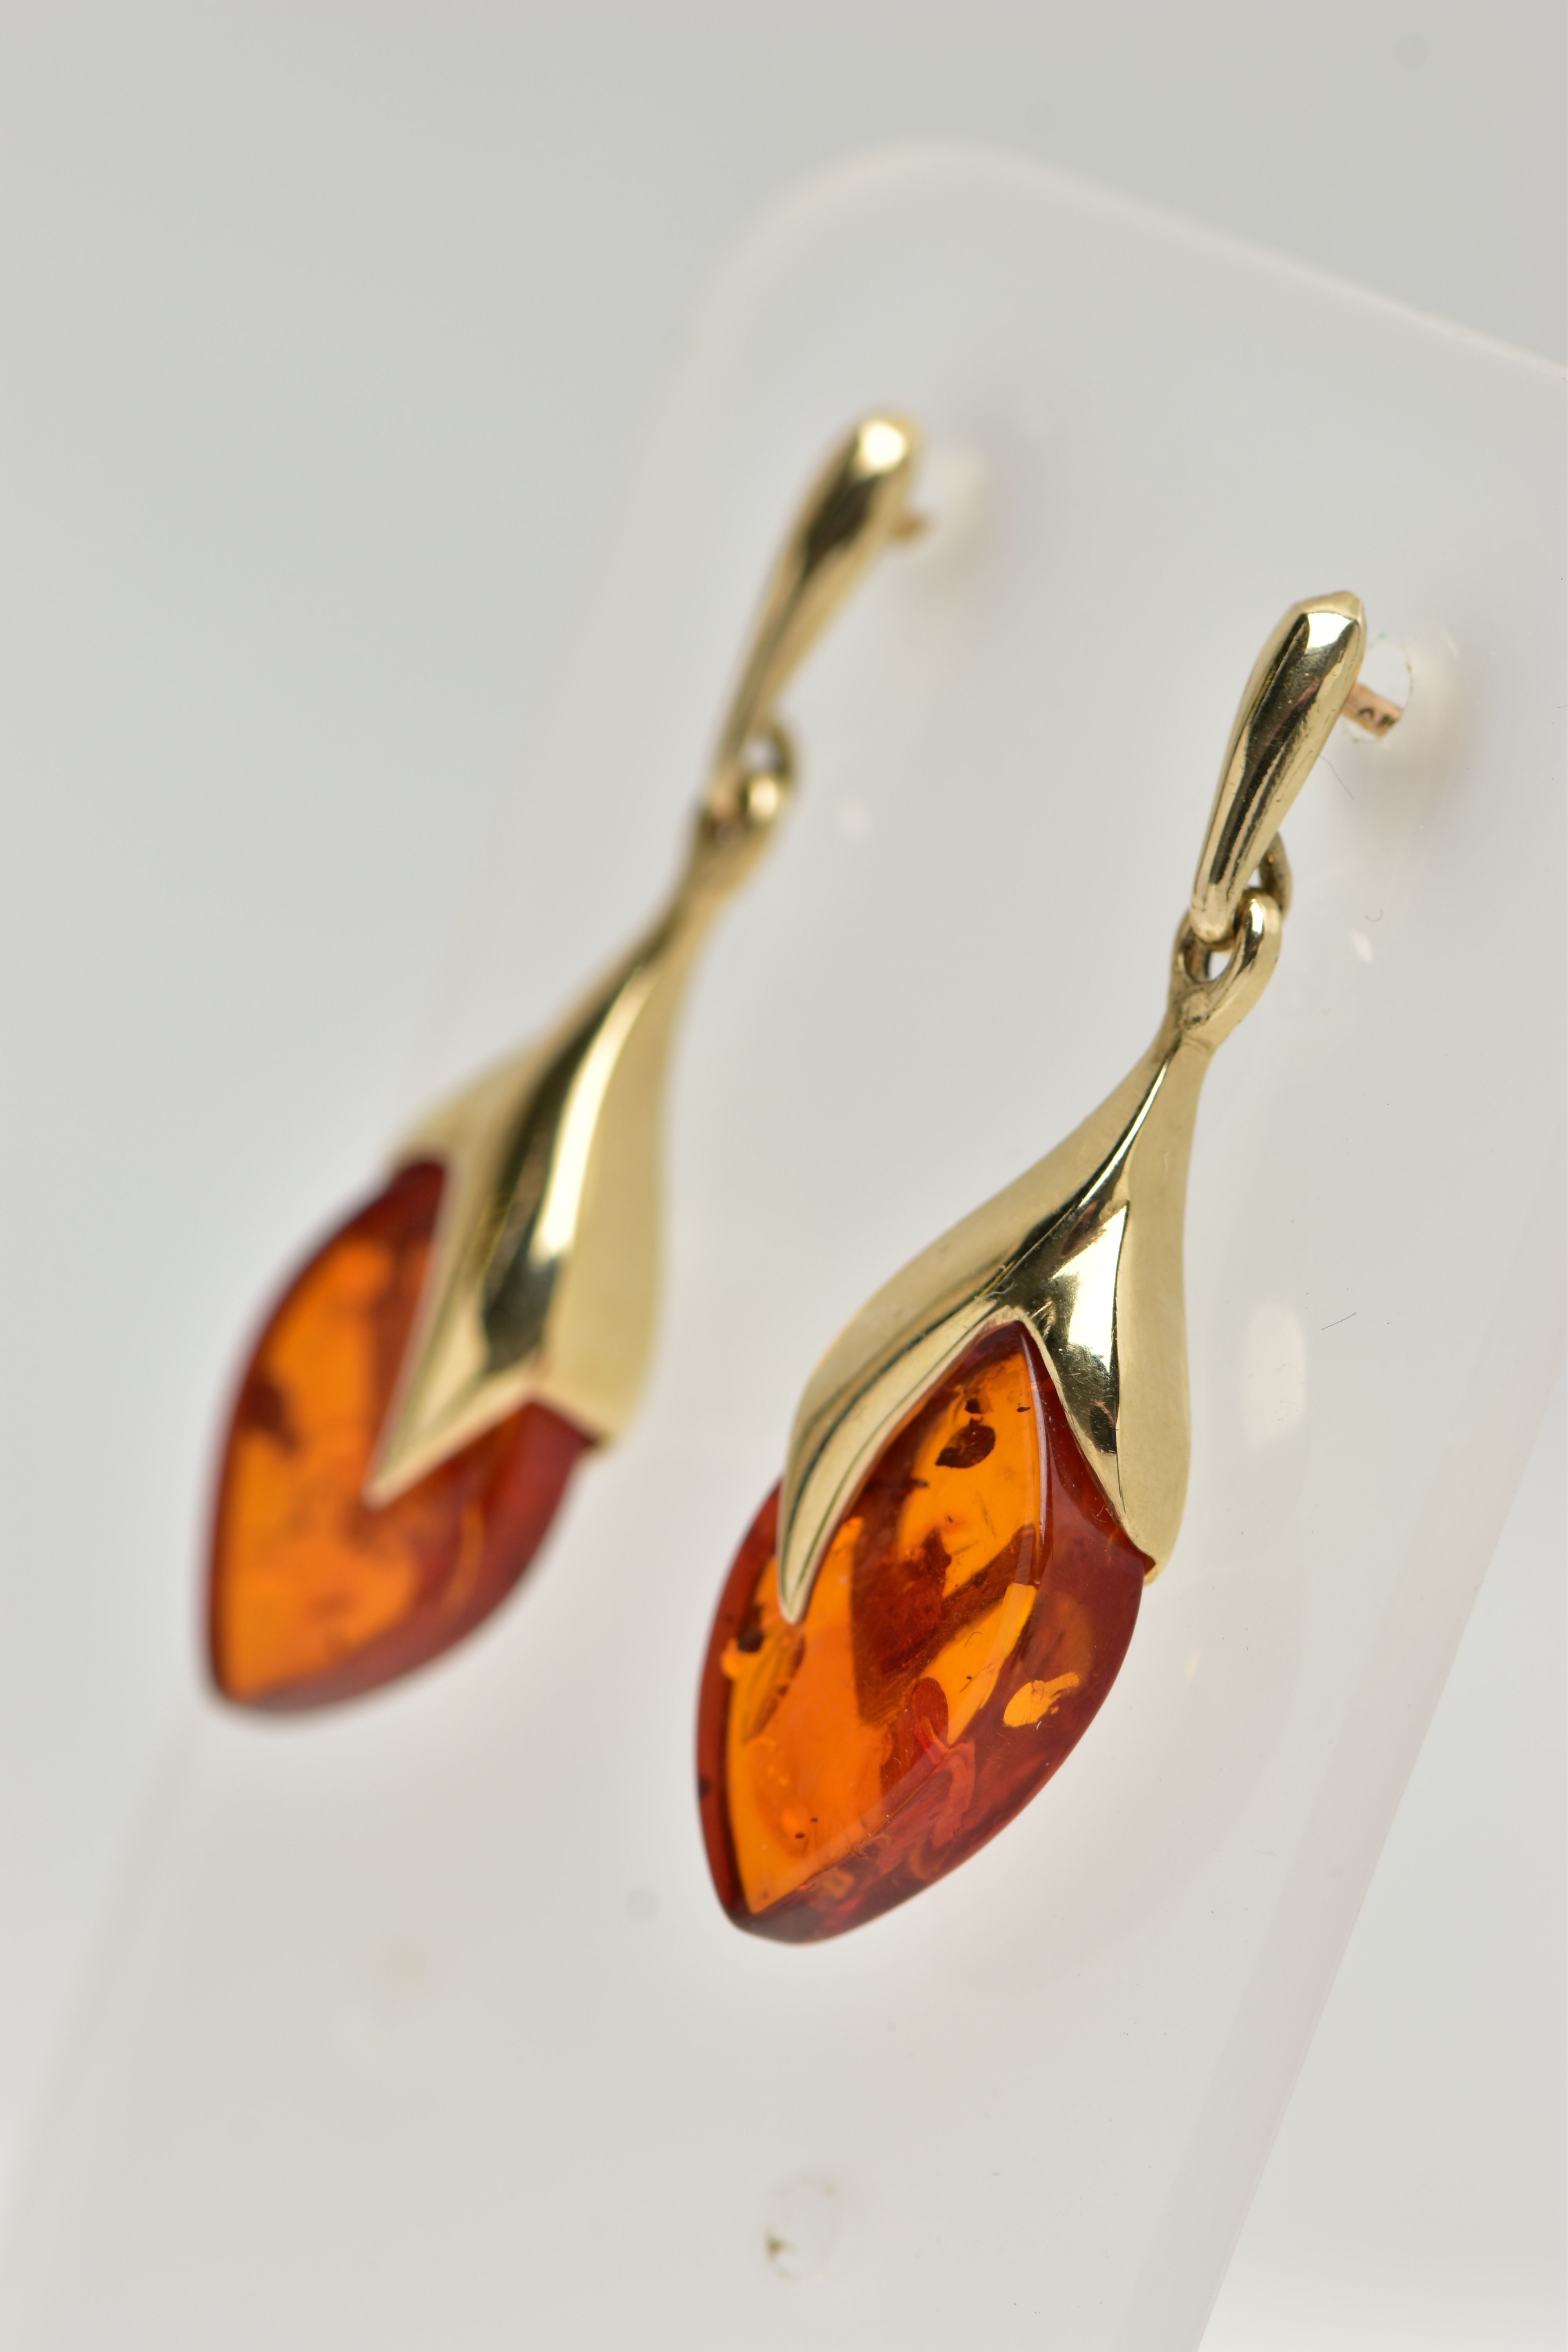 A PAIR OF 9CT GOLD, AMBER DROP EARRINGS, each designed as an oval amber drop in a yellow gold mount, - Image 2 of 3